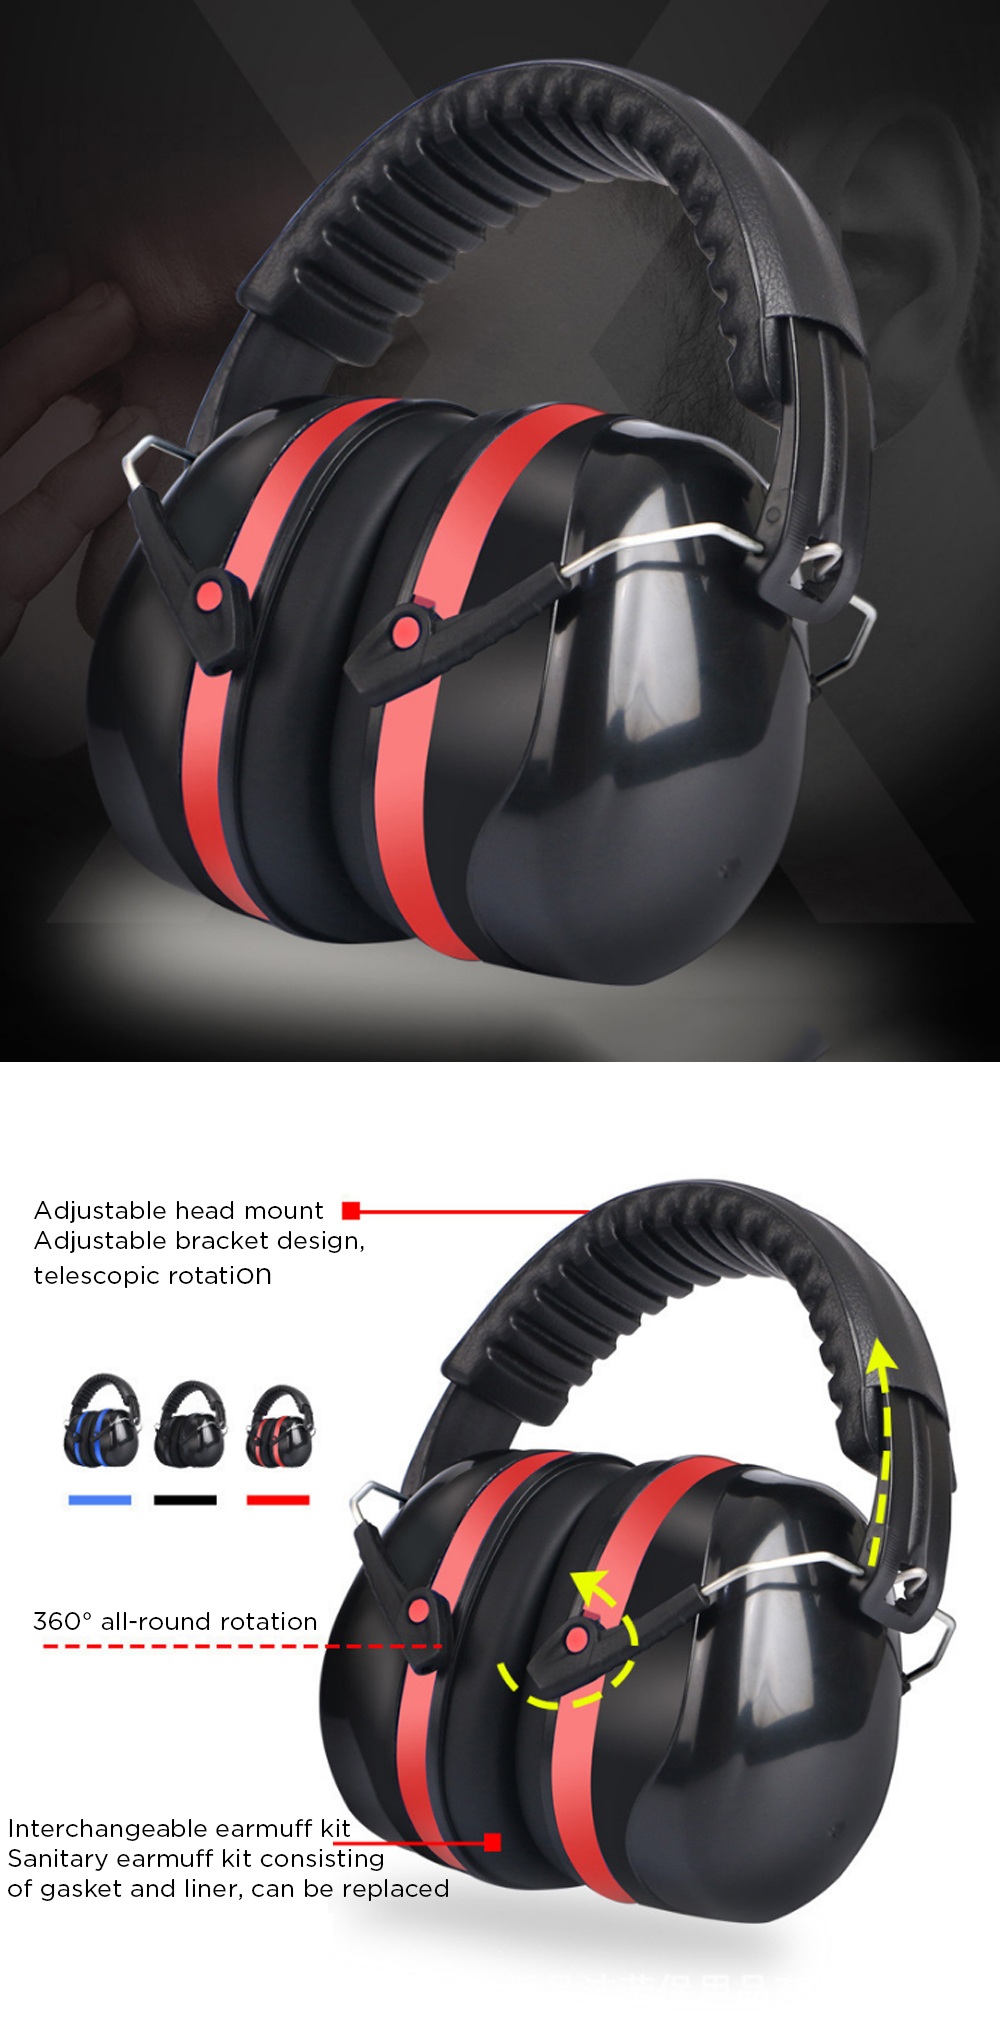 SNR-105dB-Electronic-Shooting-Earmuff-Noise-Reduction-Ear-Protection-Safety-Ear-Muffs-for-Hunting-Sh-1703550-1